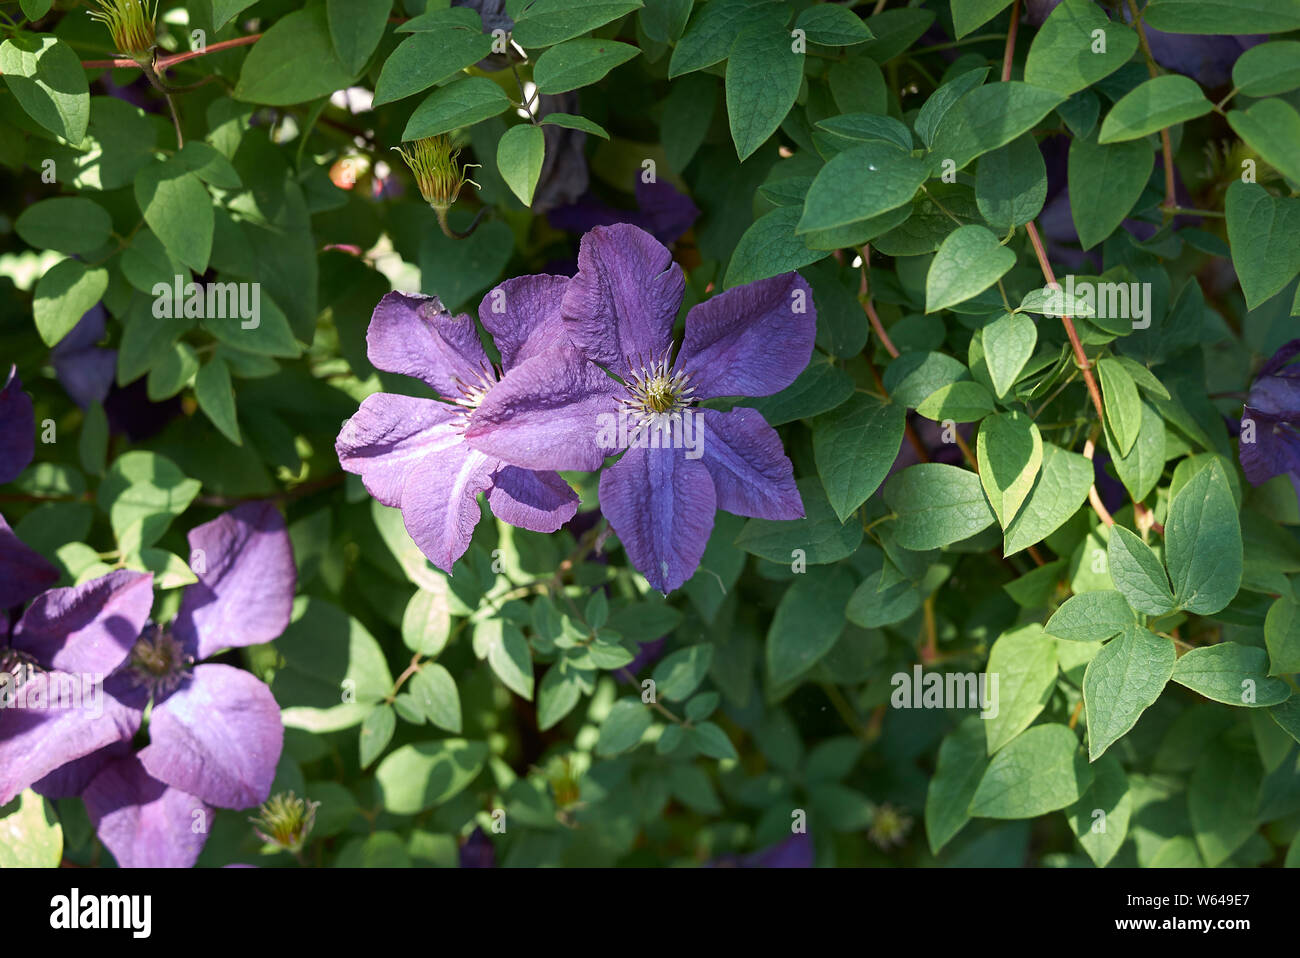 Clematis viticella purple flower close up Stock Photo